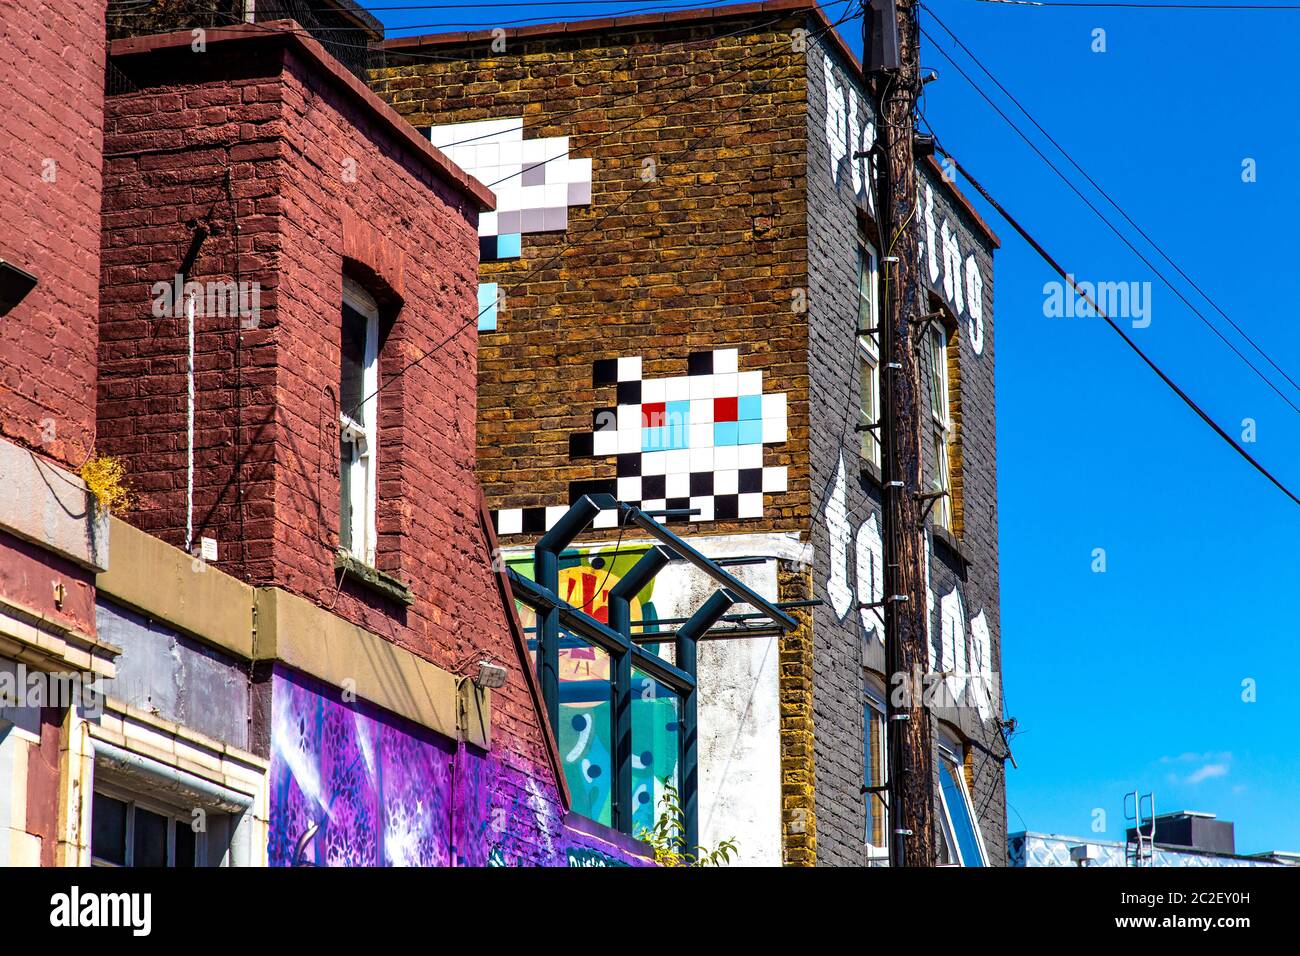 Mosaic of a space invader on the wall of a building by street artist Invader, Camden, London, UK Stock Photo